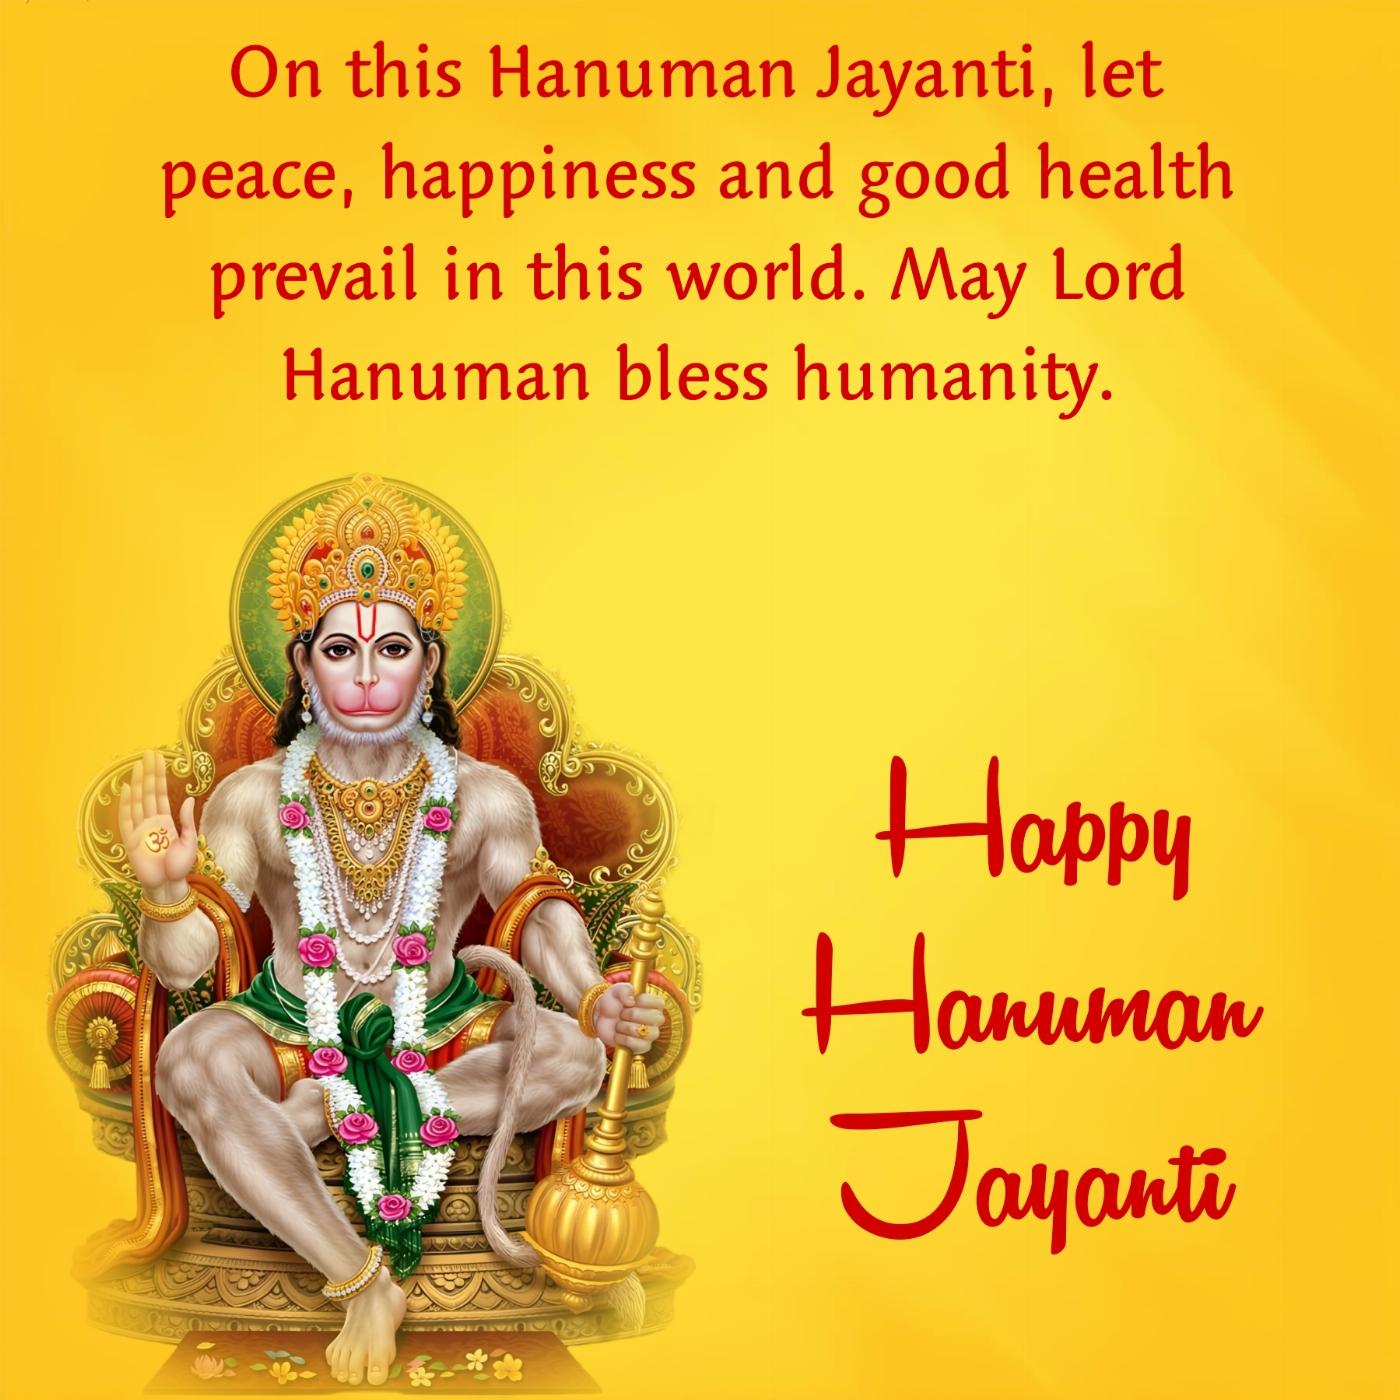 On this Hanuman Jayanti let peace happiness and good health